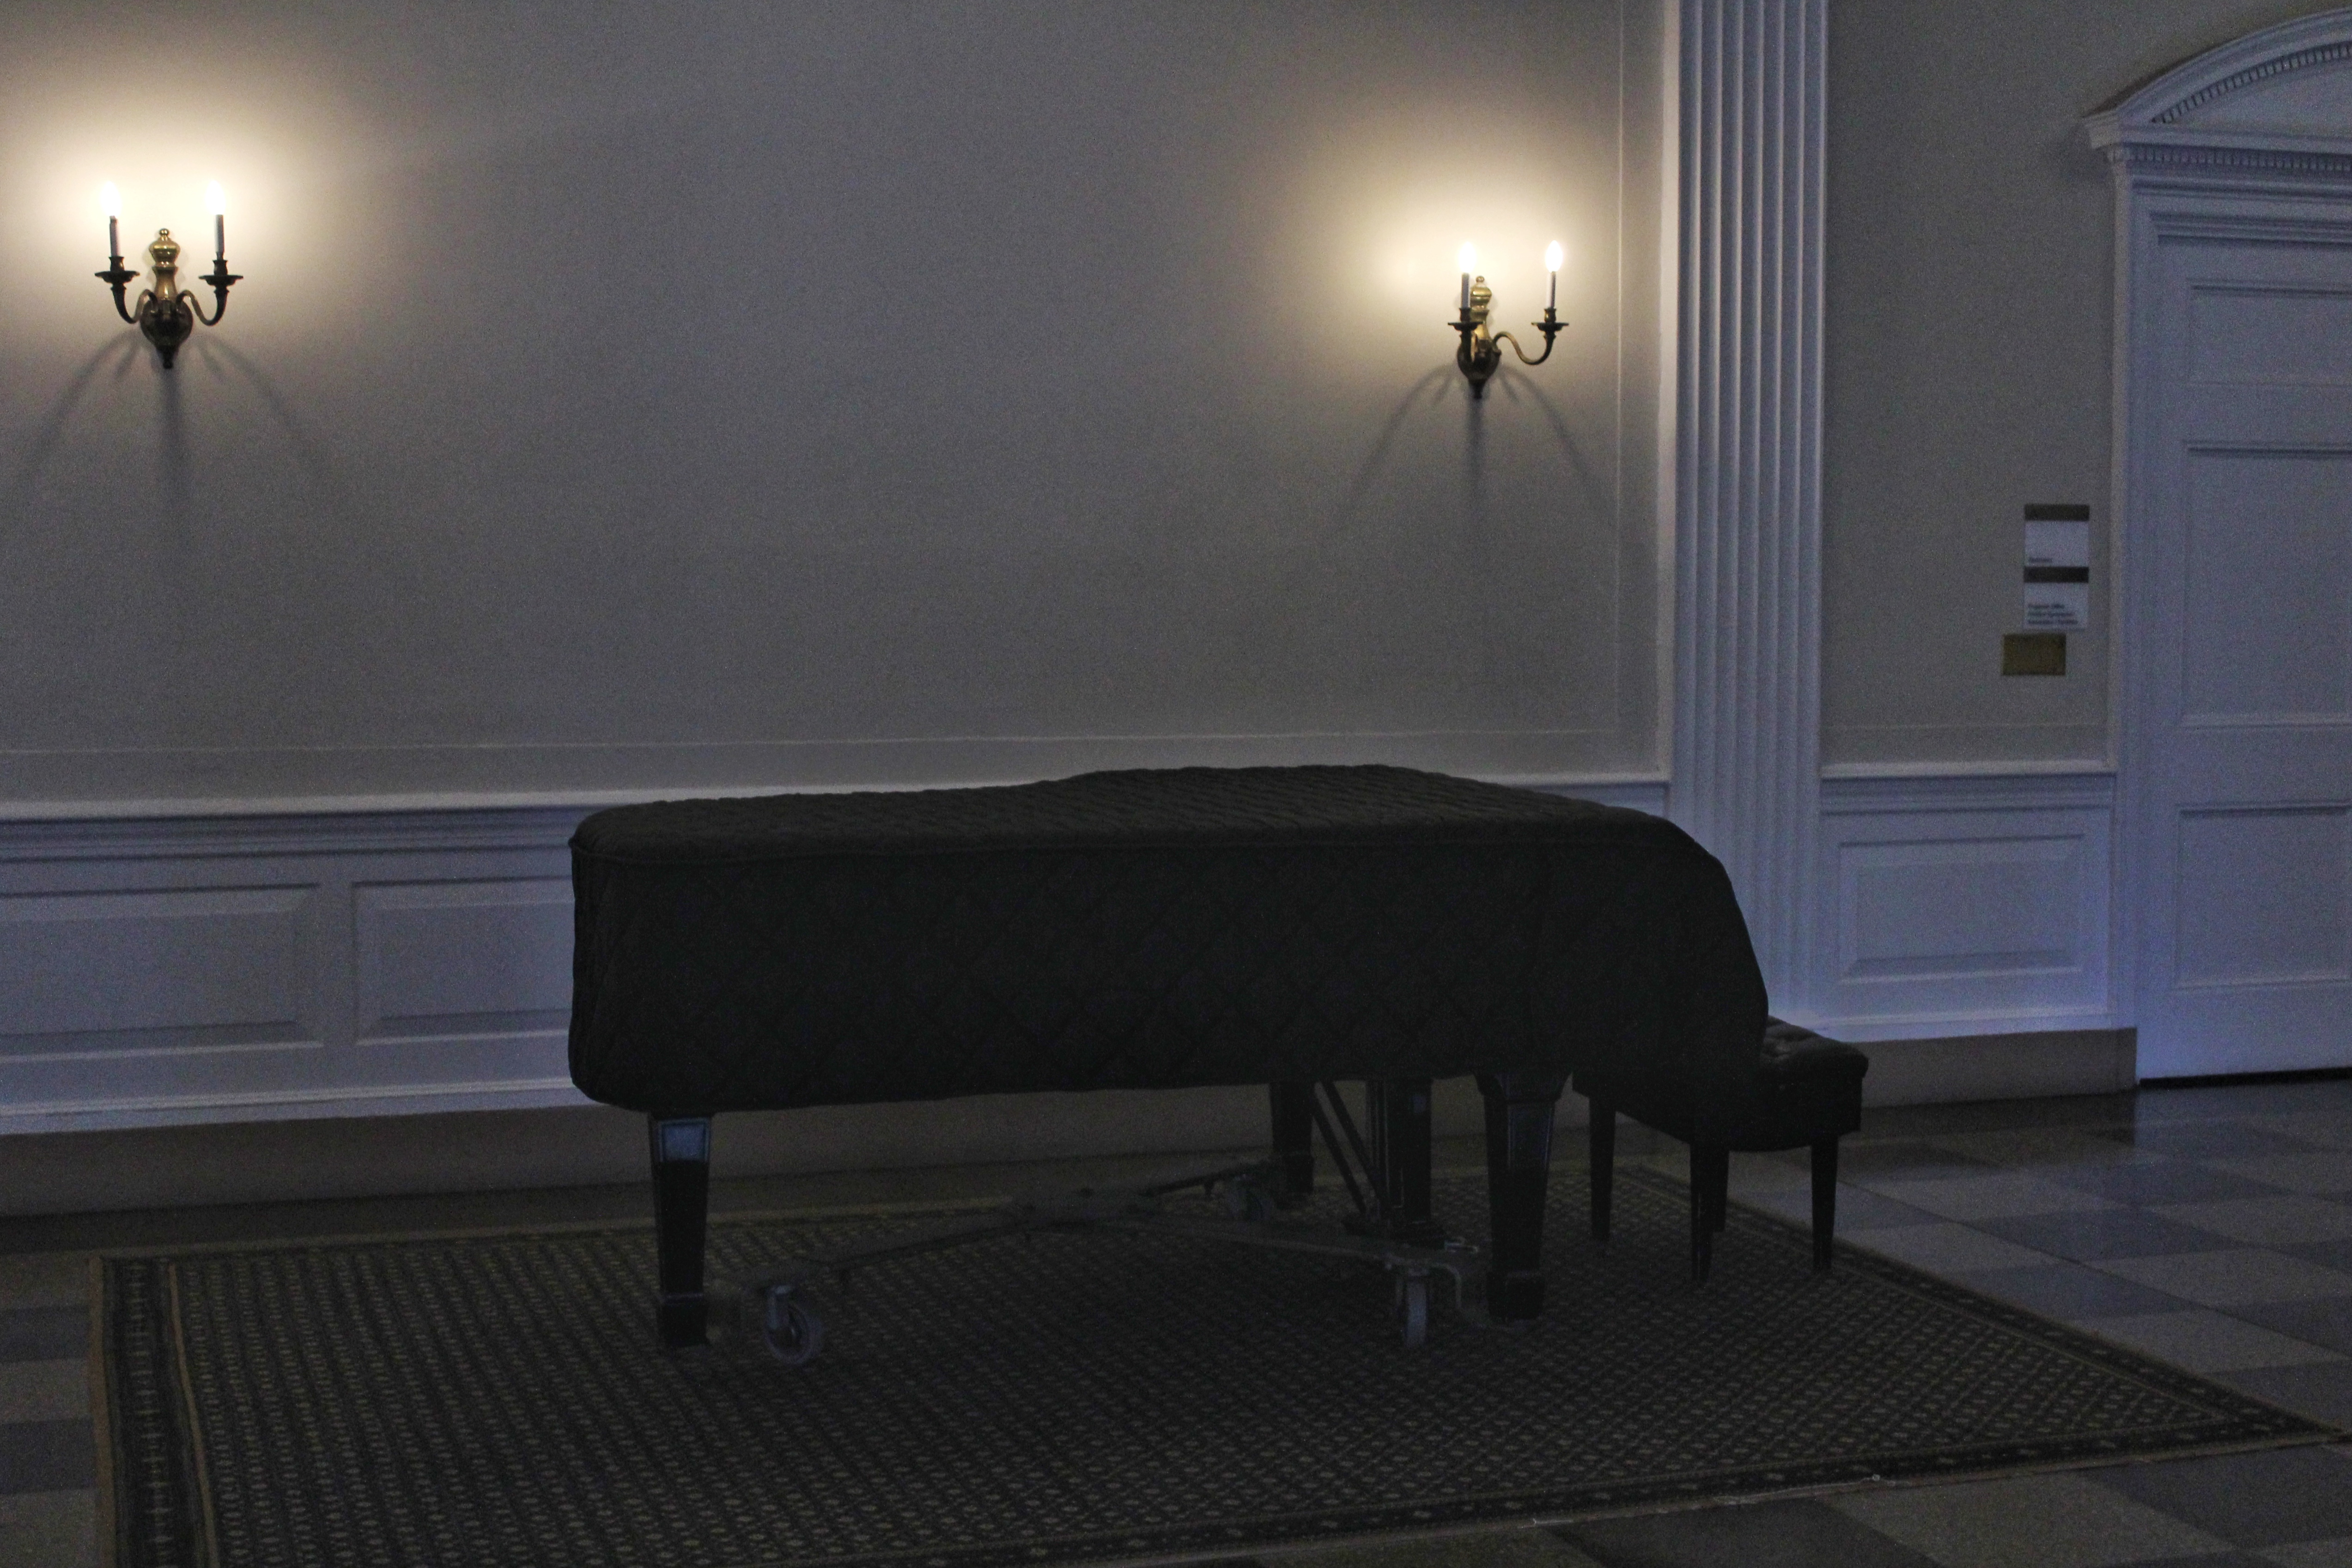 A piano on a rug.